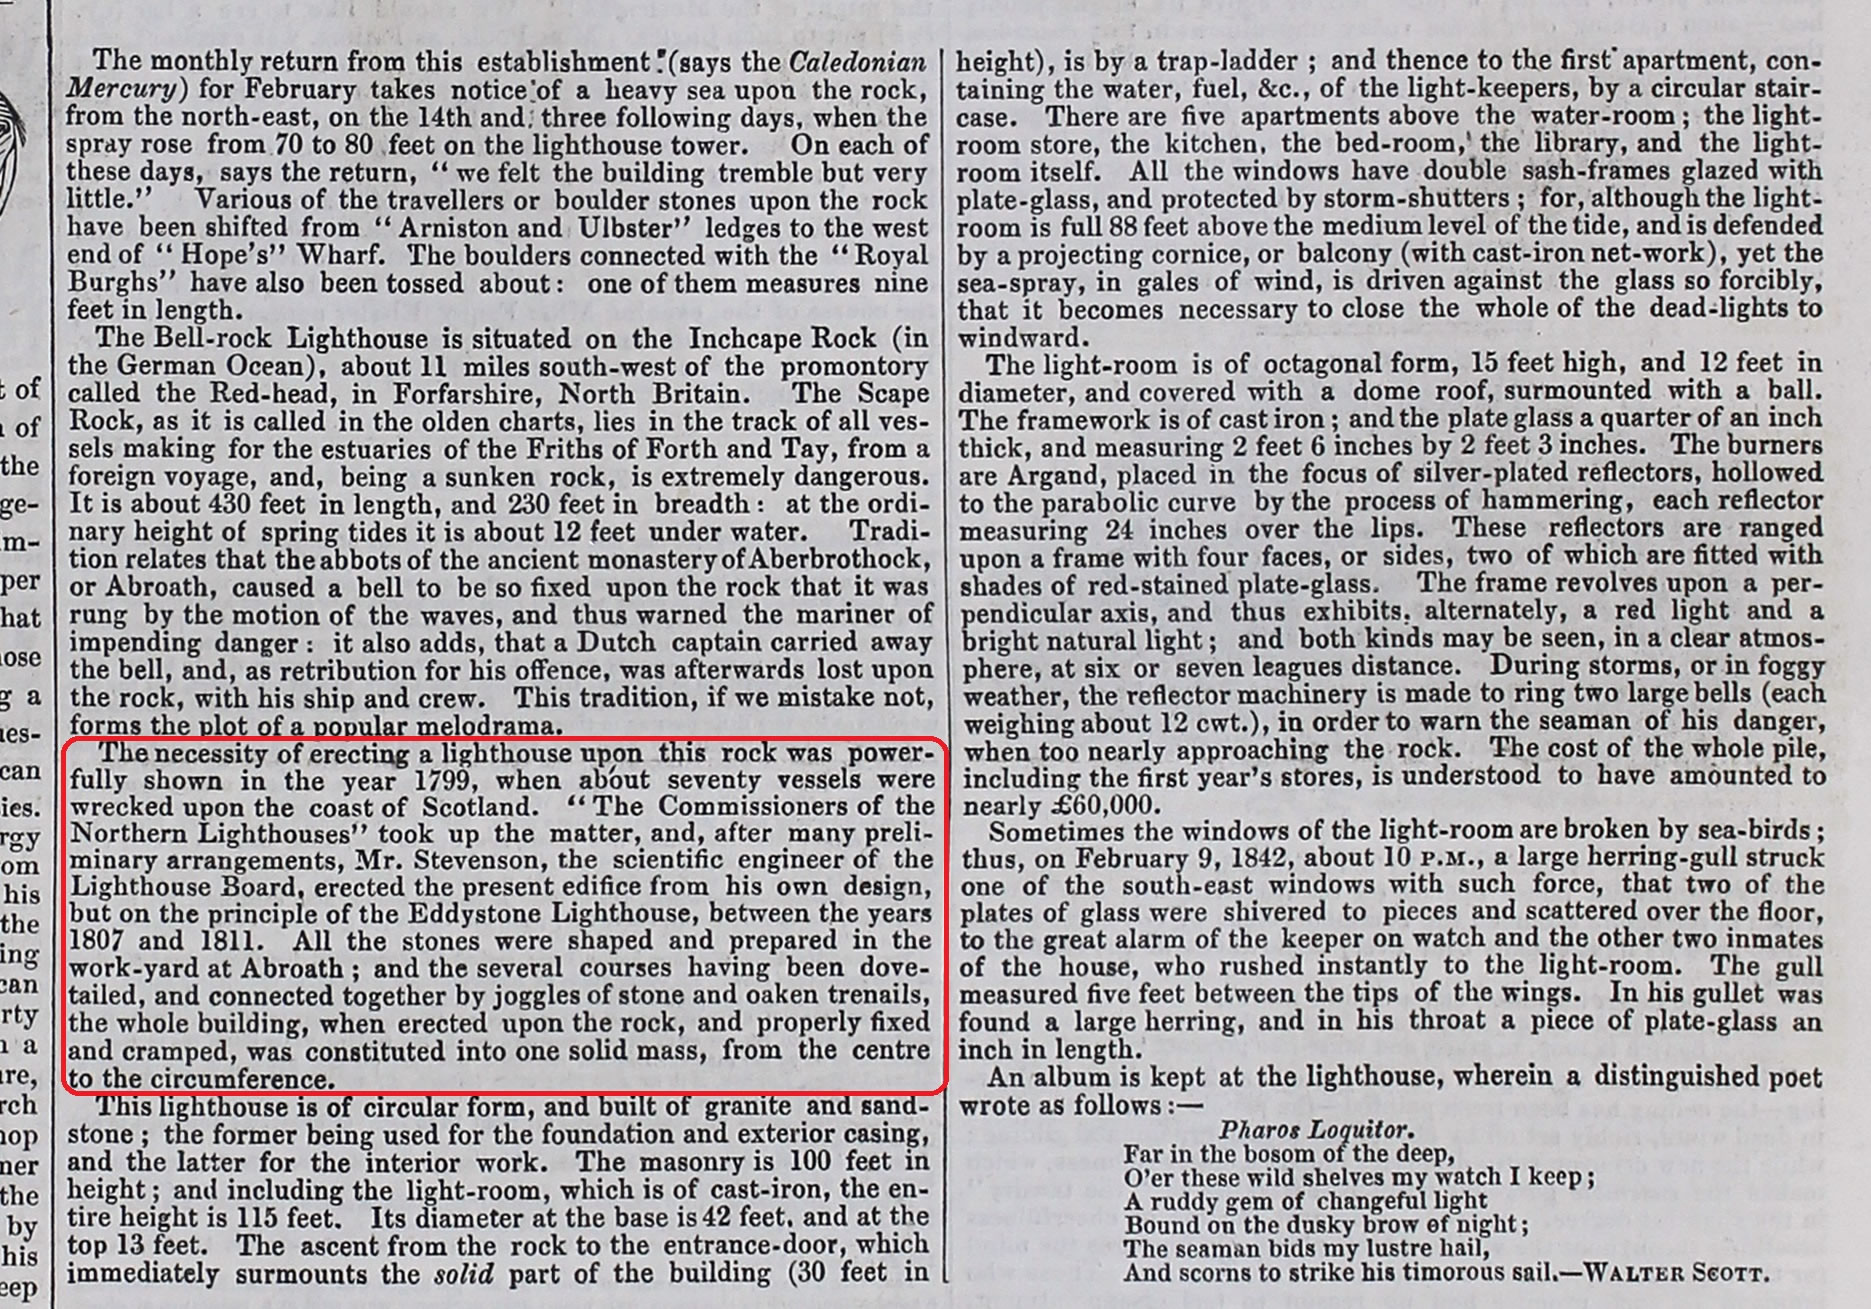 The London Illustrated News 18 March 1843 found in TheGenealogist's Newspapers and Magazines Collection